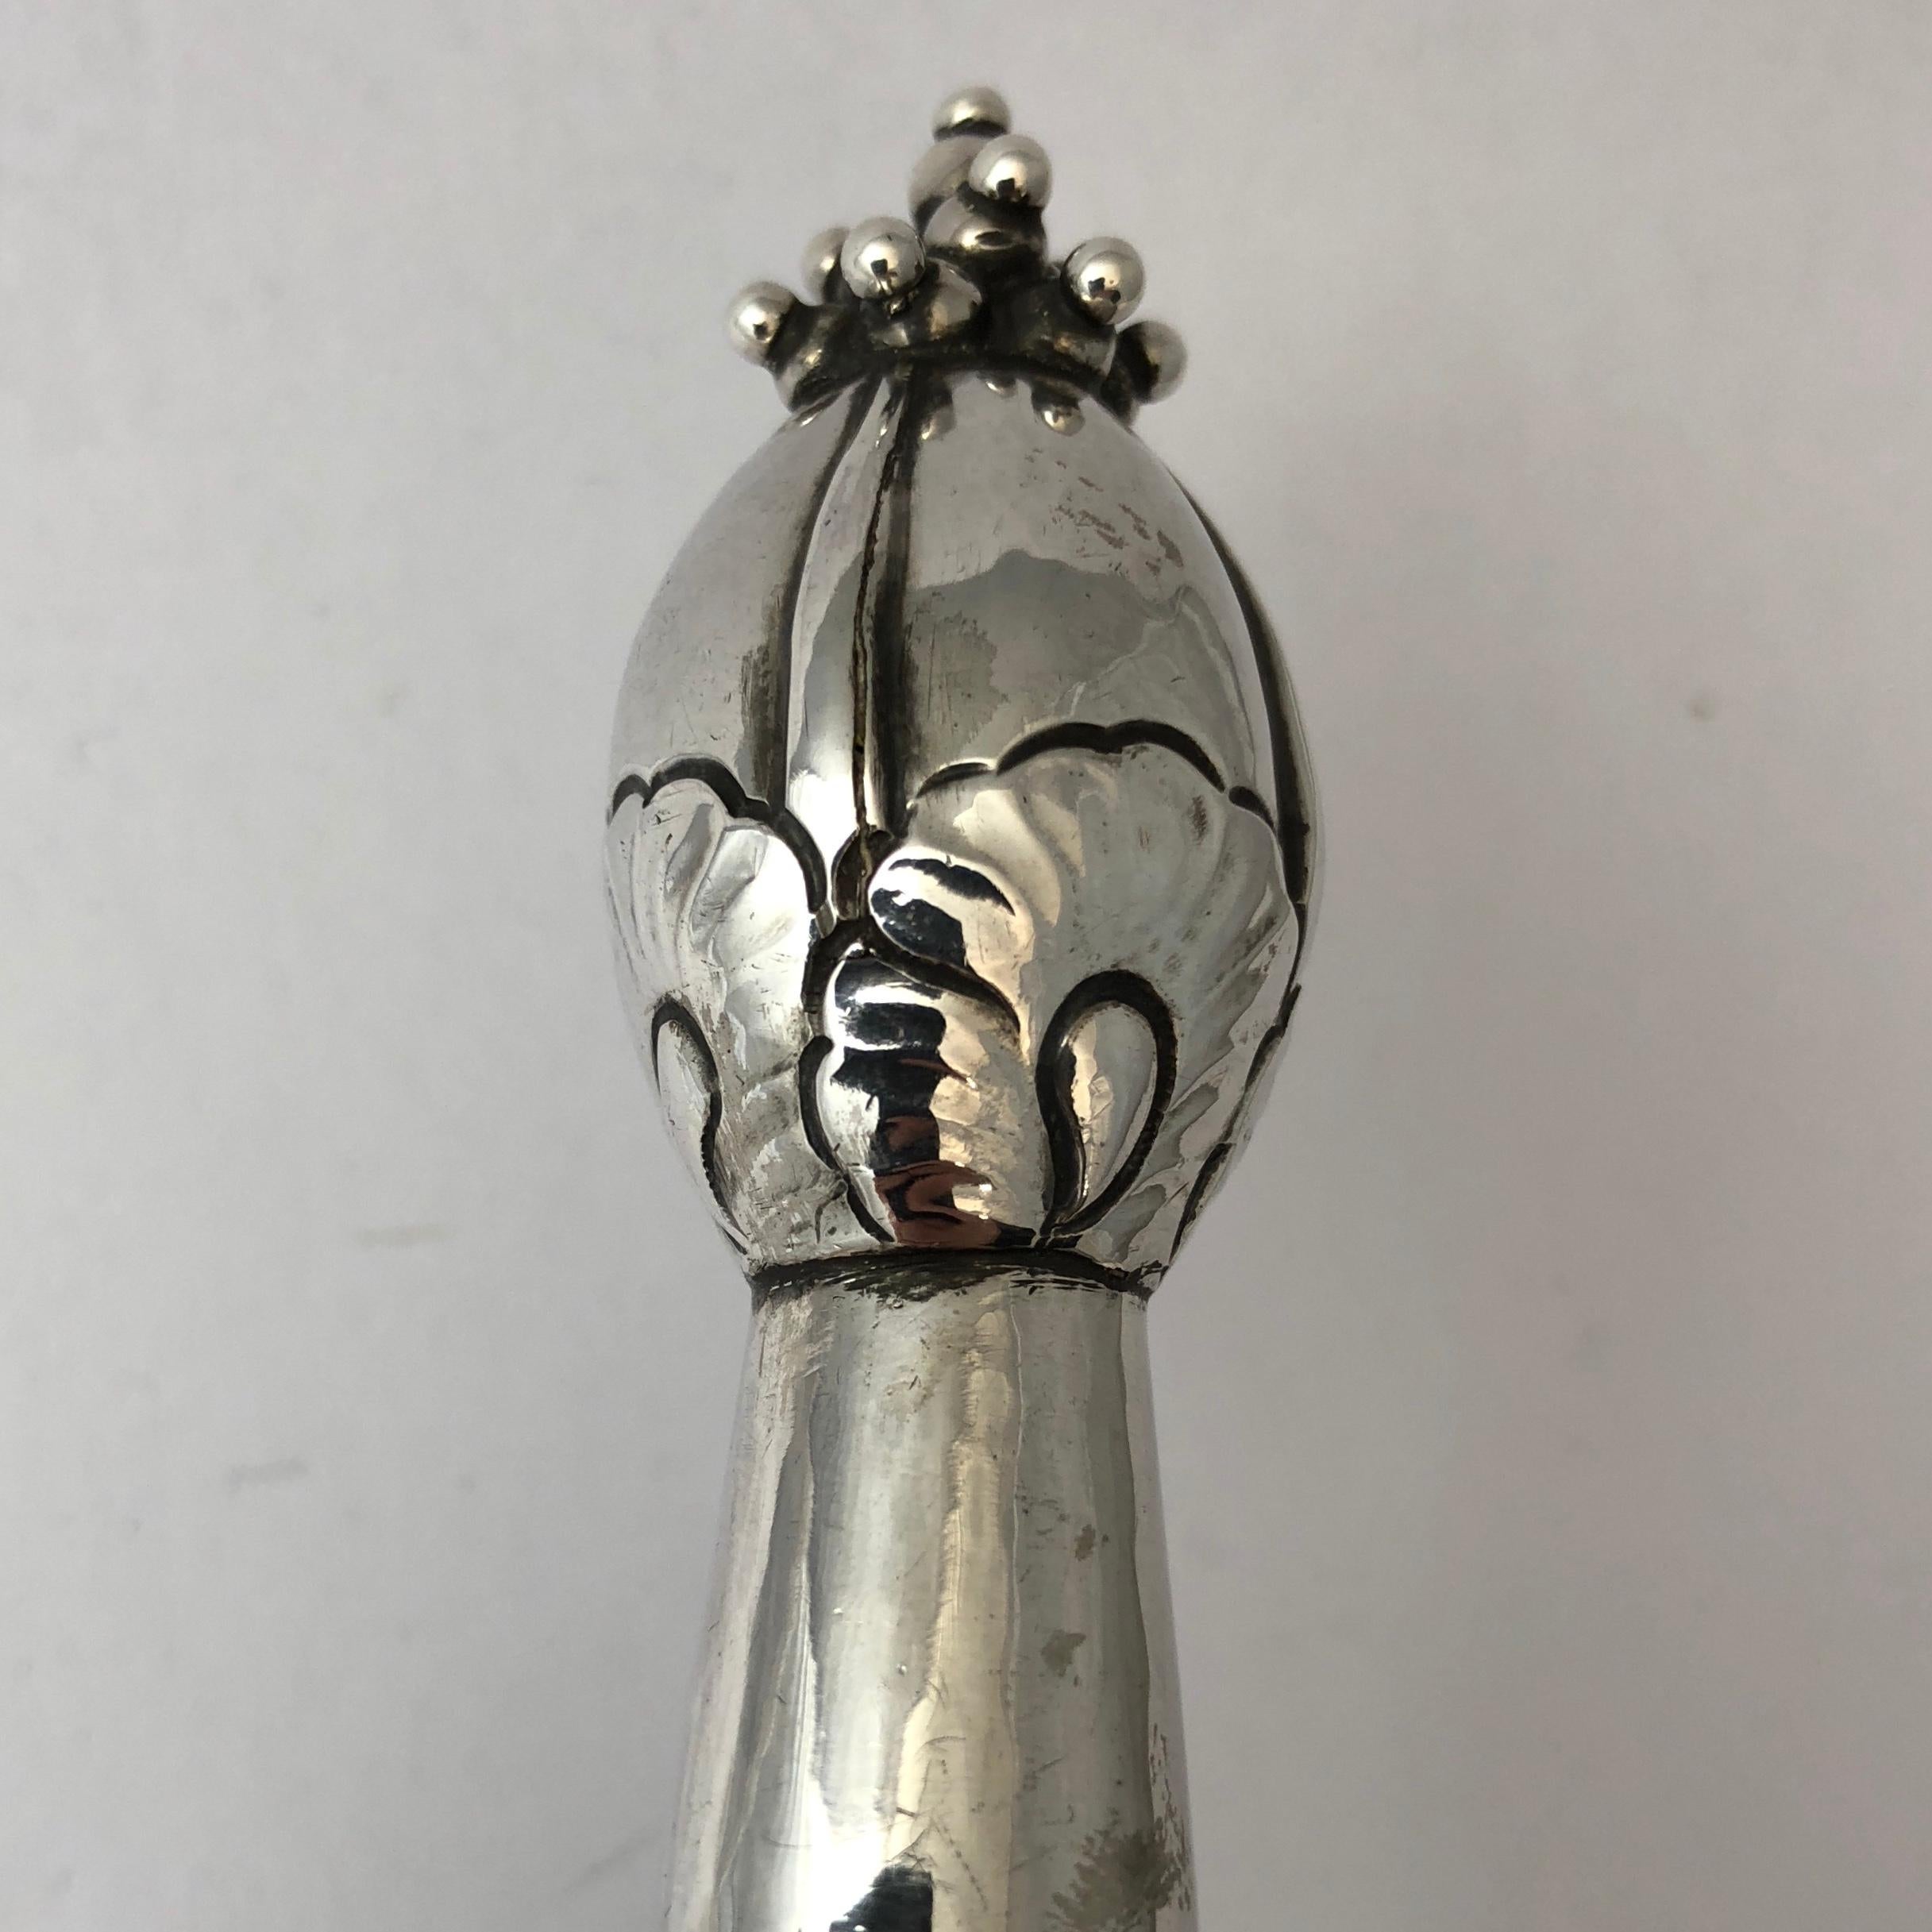 This is an antique sterling silver Georg Jensen punch ladle with ebony shaft and beautiful floral decoration, design #125 by Georg Jensen. Please note the beautiful hand-chased details on the handle and on the bowl of the spoon.

Measures 15 1/4?